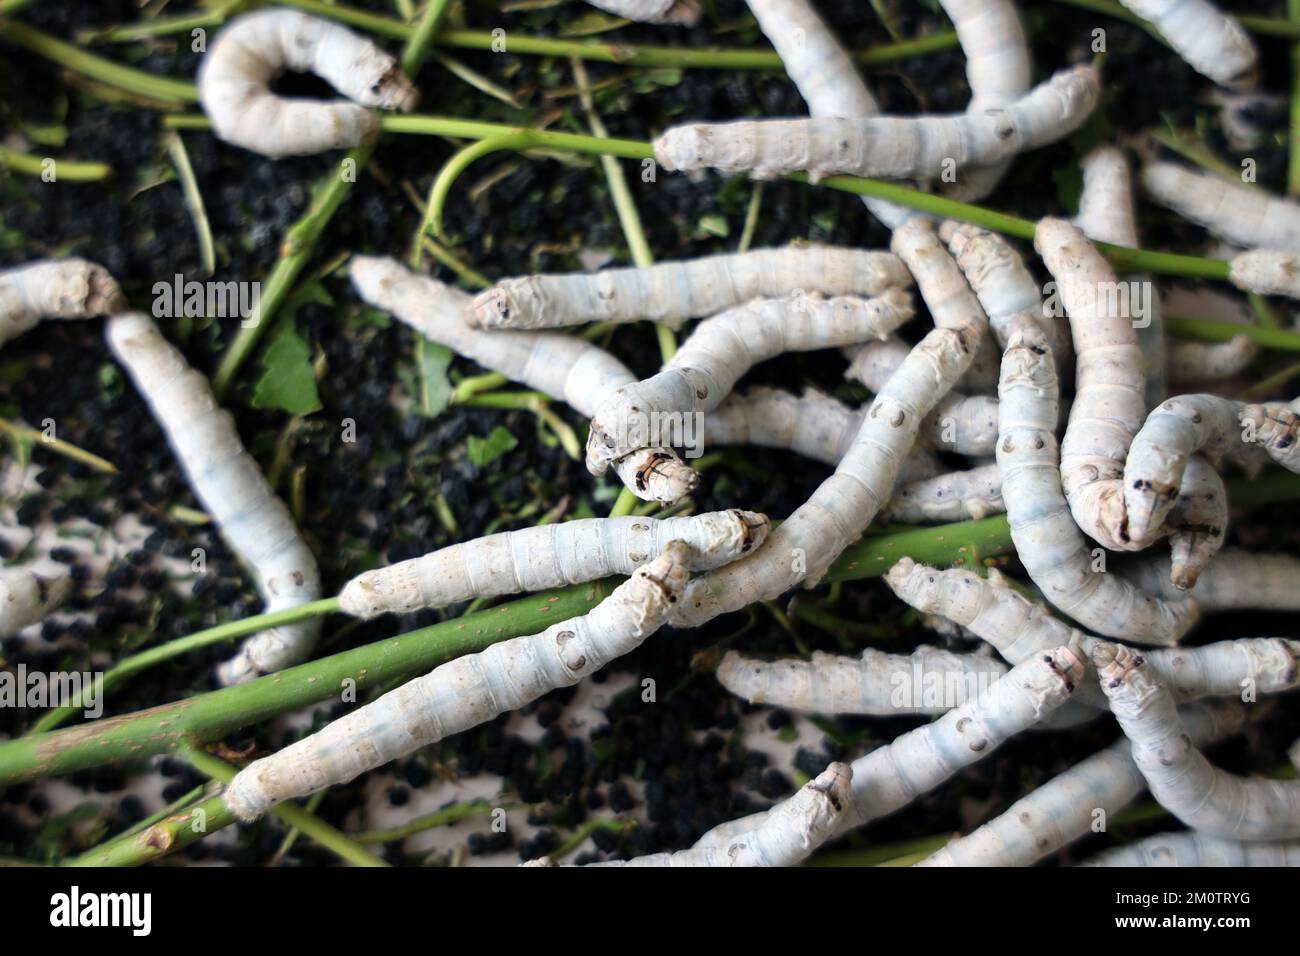 The silkworm is the larva or caterpillar of the domestic. It is an economically important insect, being a primary producer of silk. Stock Photo